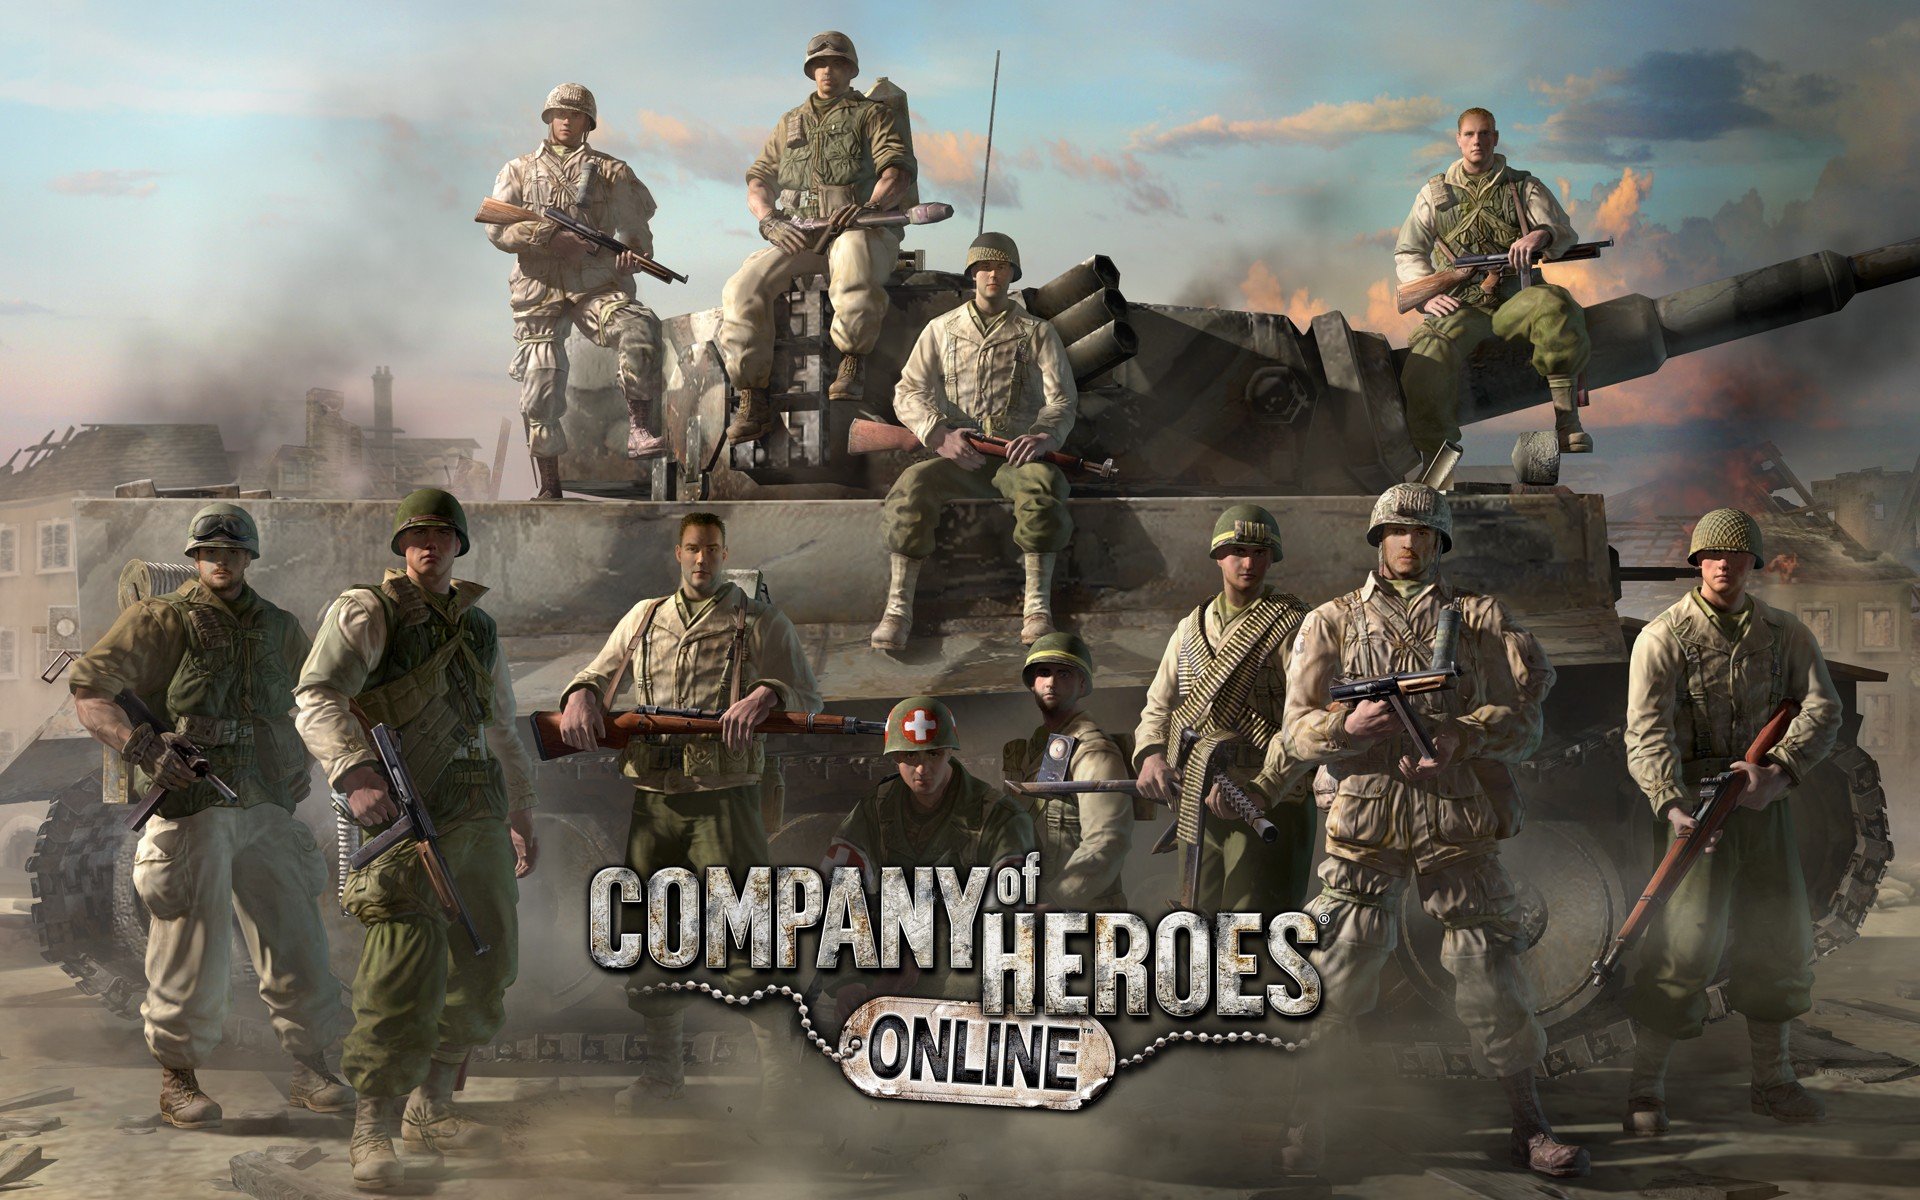 company of heroes 1 game download free full version windows 10